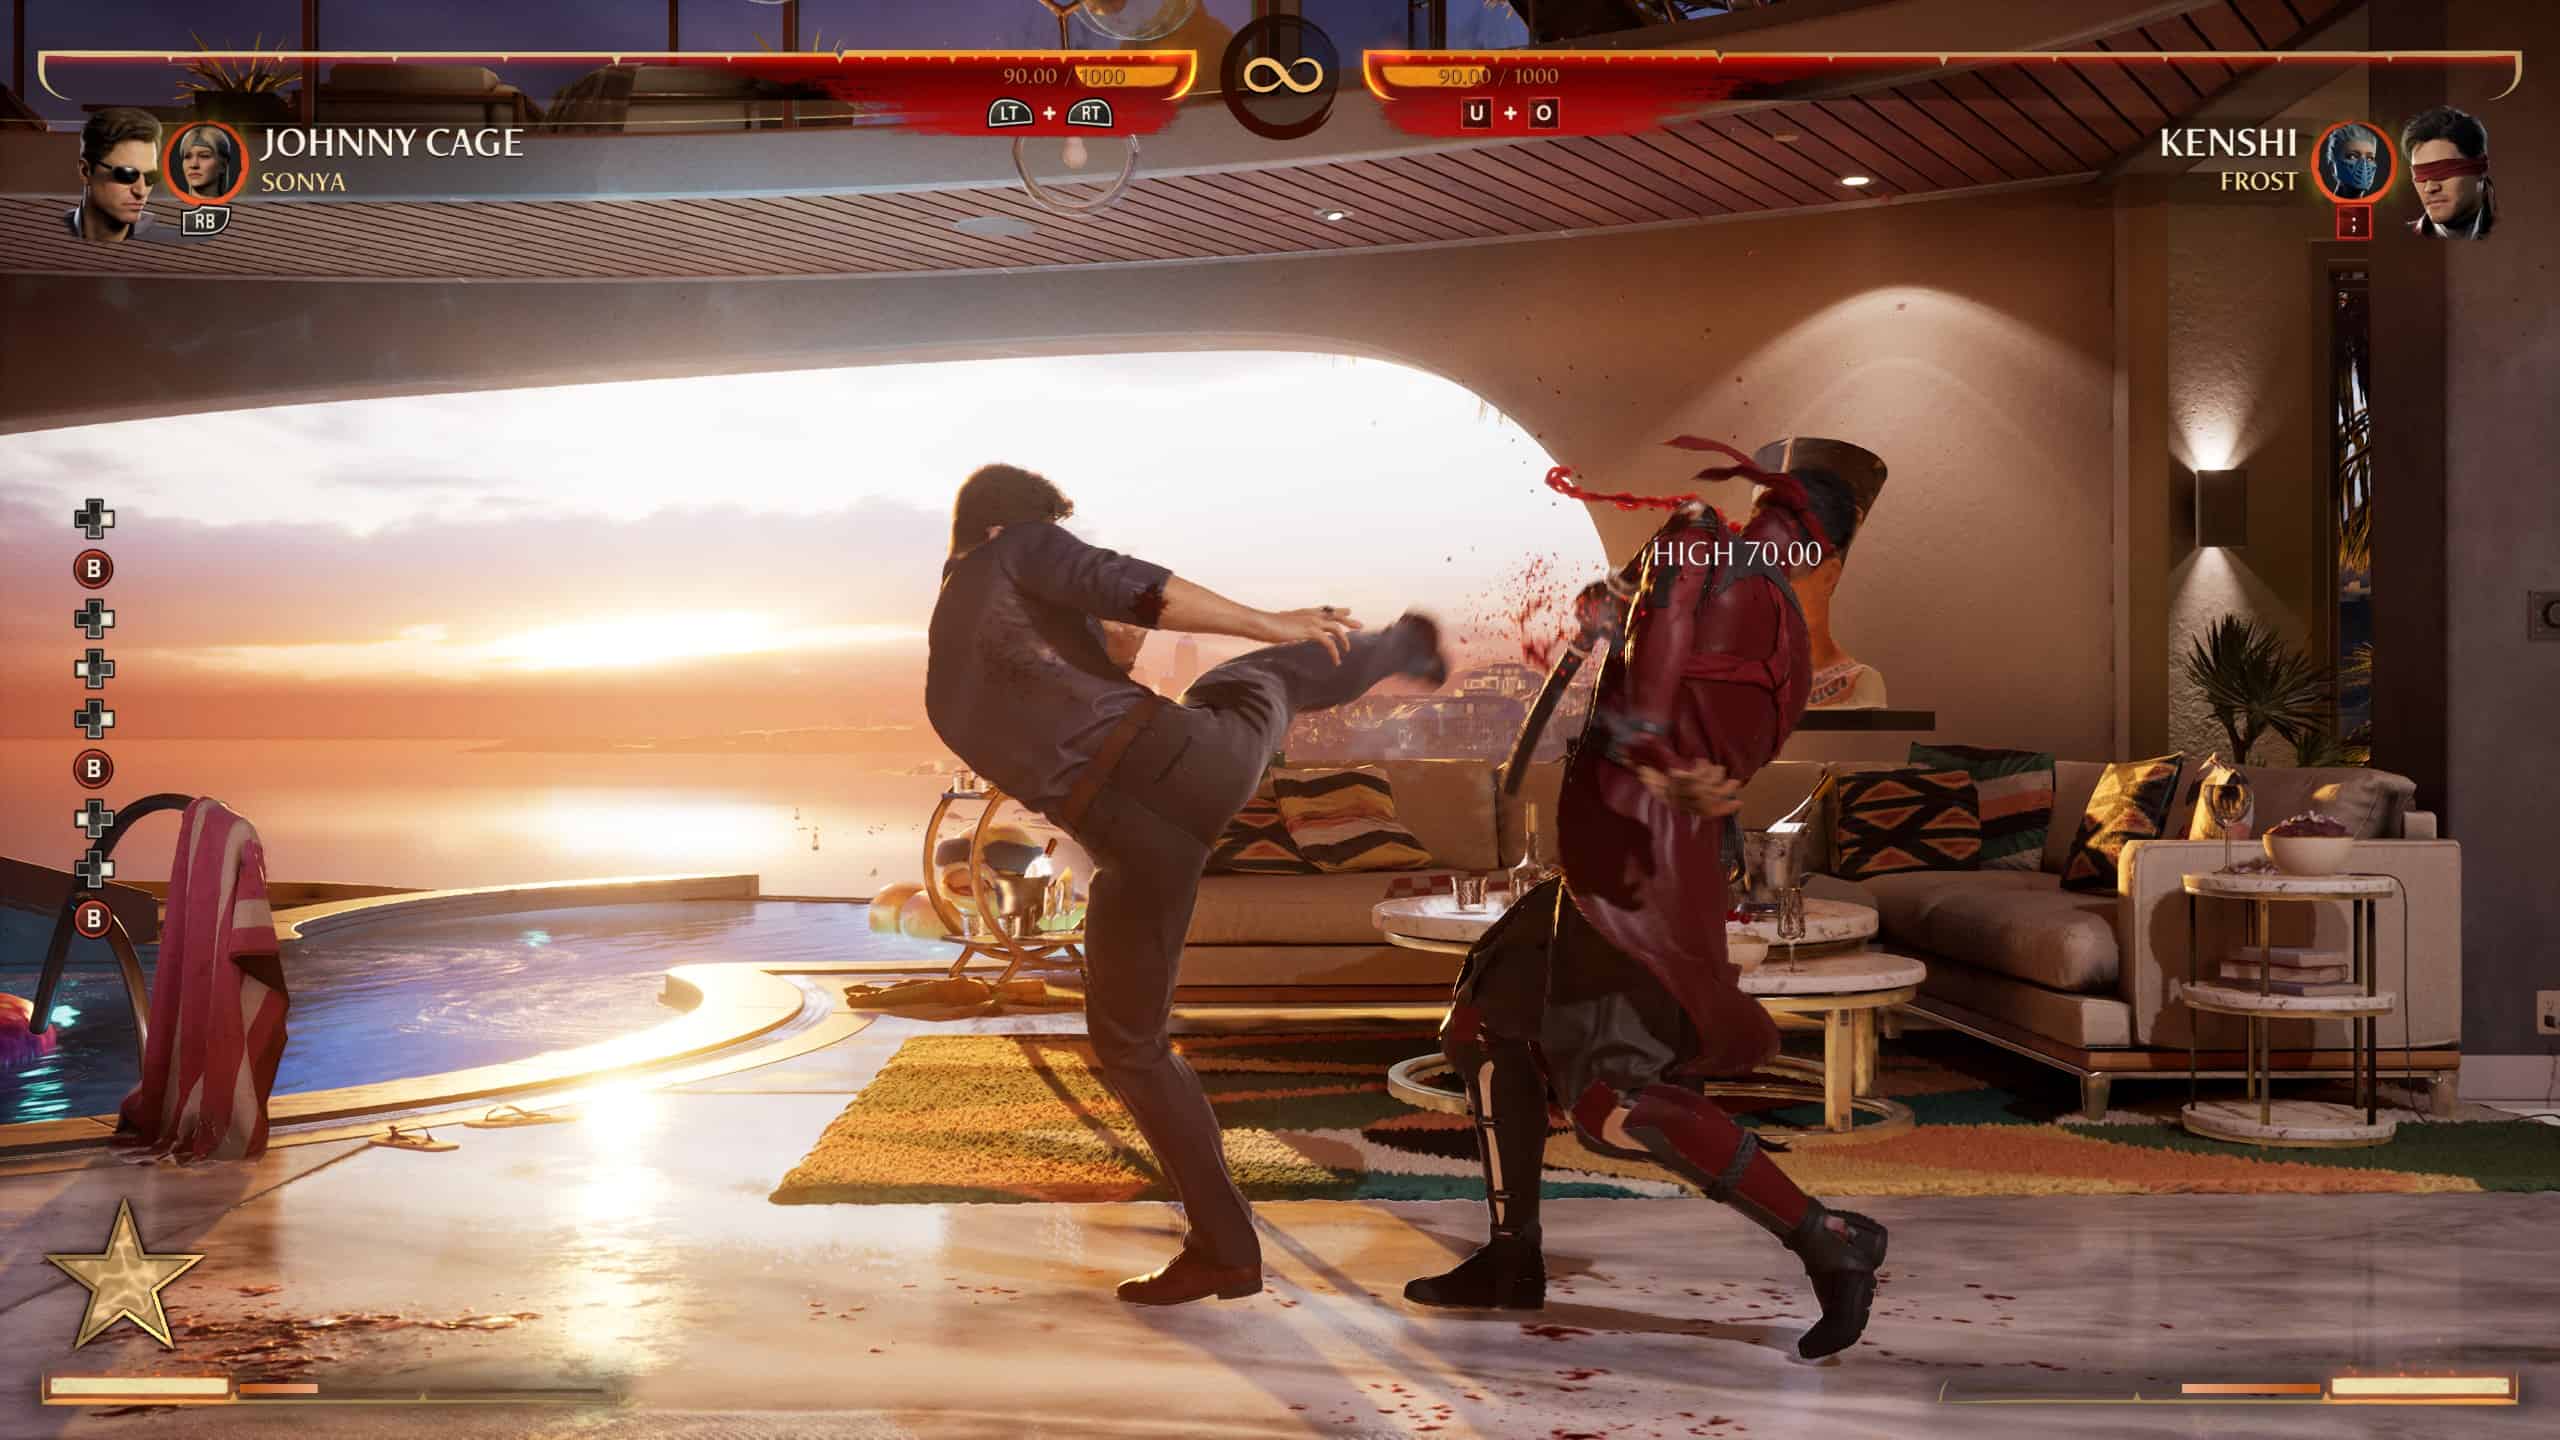 Mortal Kombat 1 Johnny Cage: An image of Johnny Cage fighting Kenshi in his mansion.